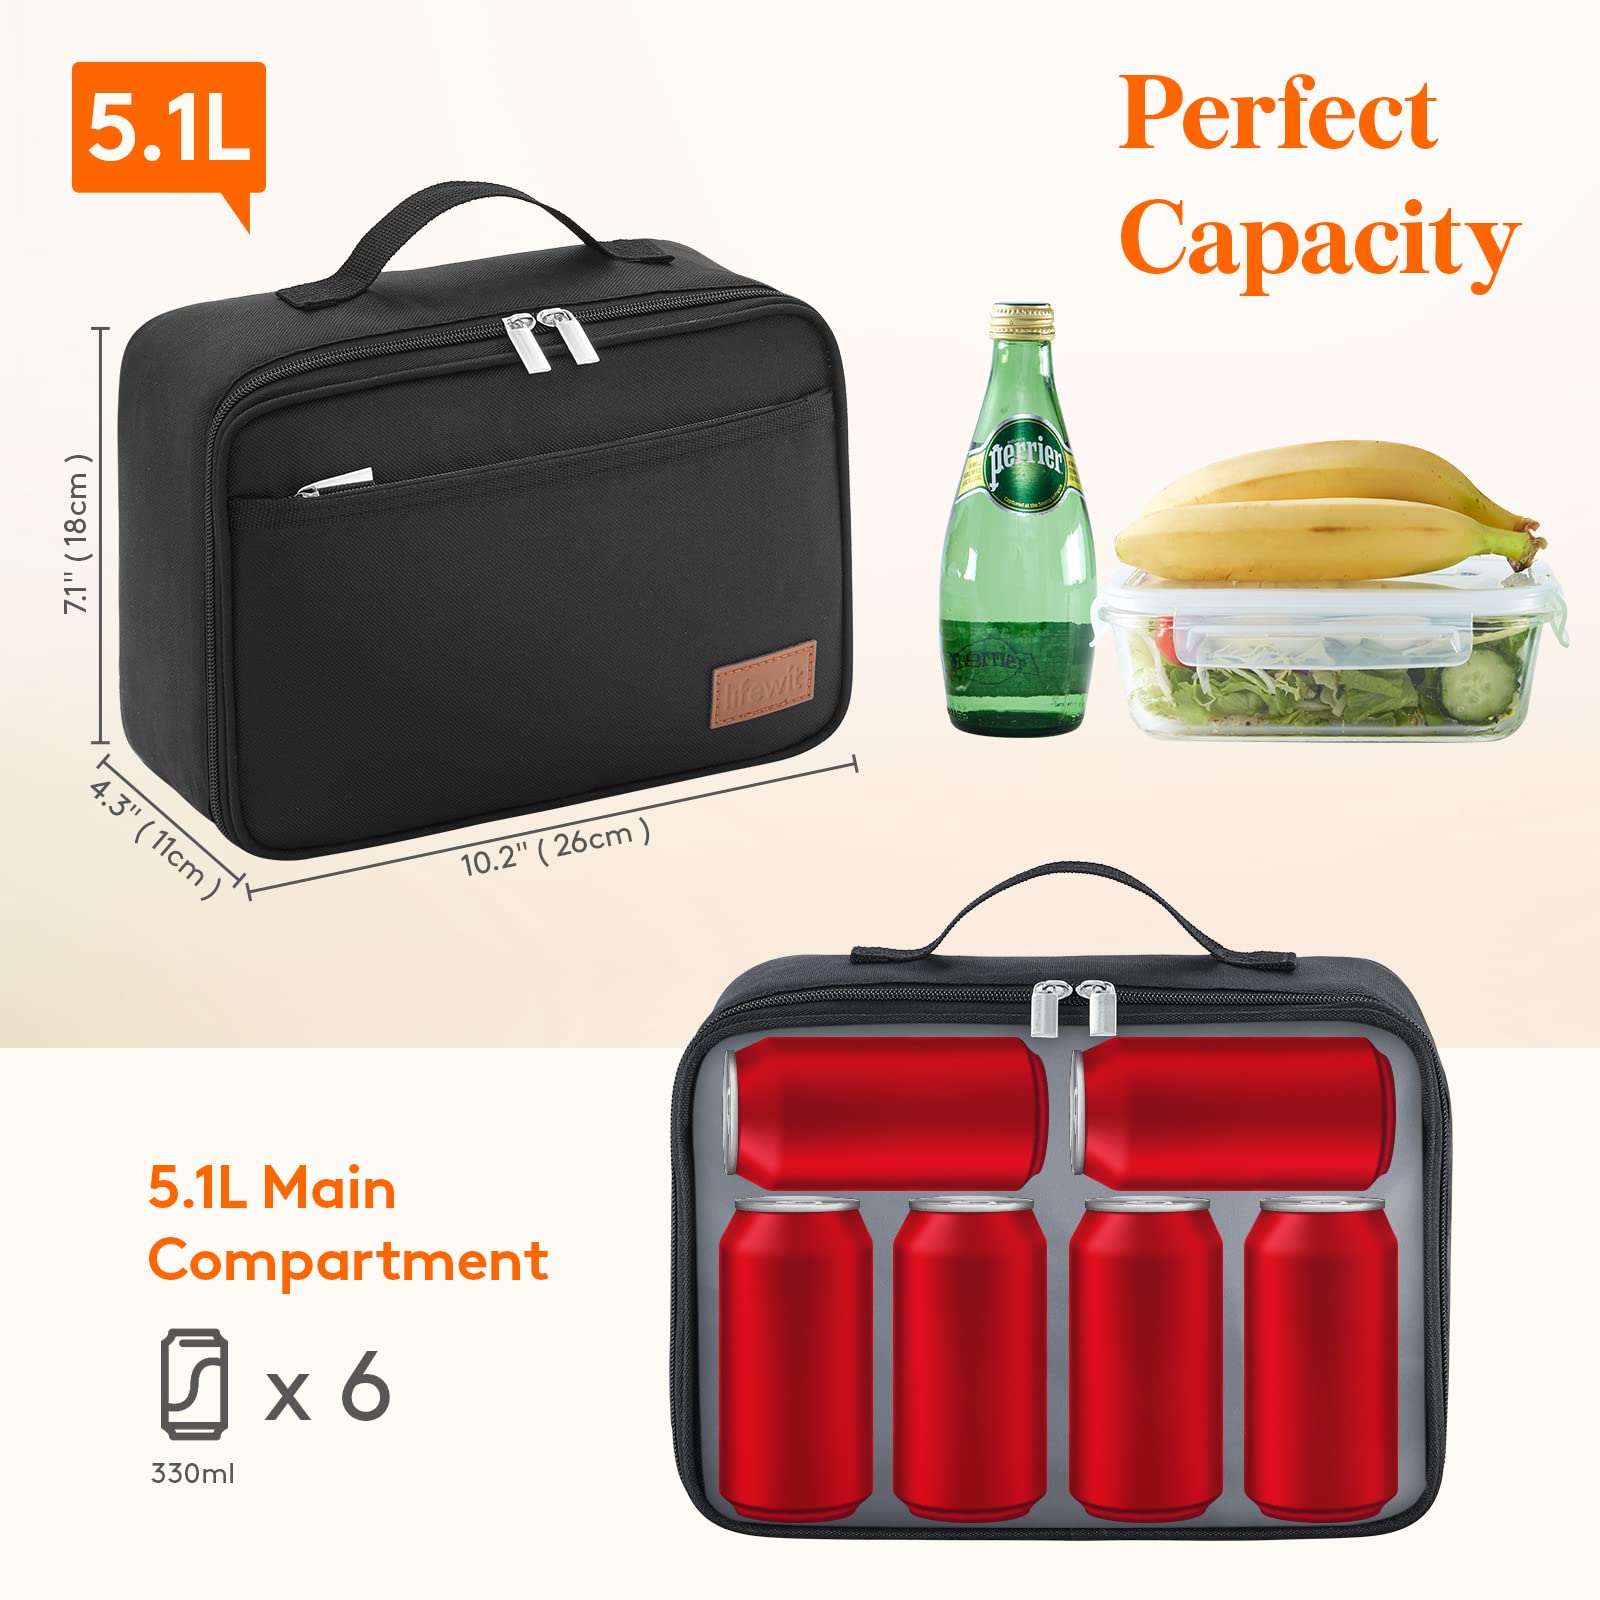 Lifewit Freezable Lunch Box, Insulated Reusable Lunch Bag with 2 Ice Packs, Mini Cooler Snack Bag for Bento Box for Salad, Sandwich, Snacks for Boys/Girls/Men/Women for School/Work/Daycare, Black